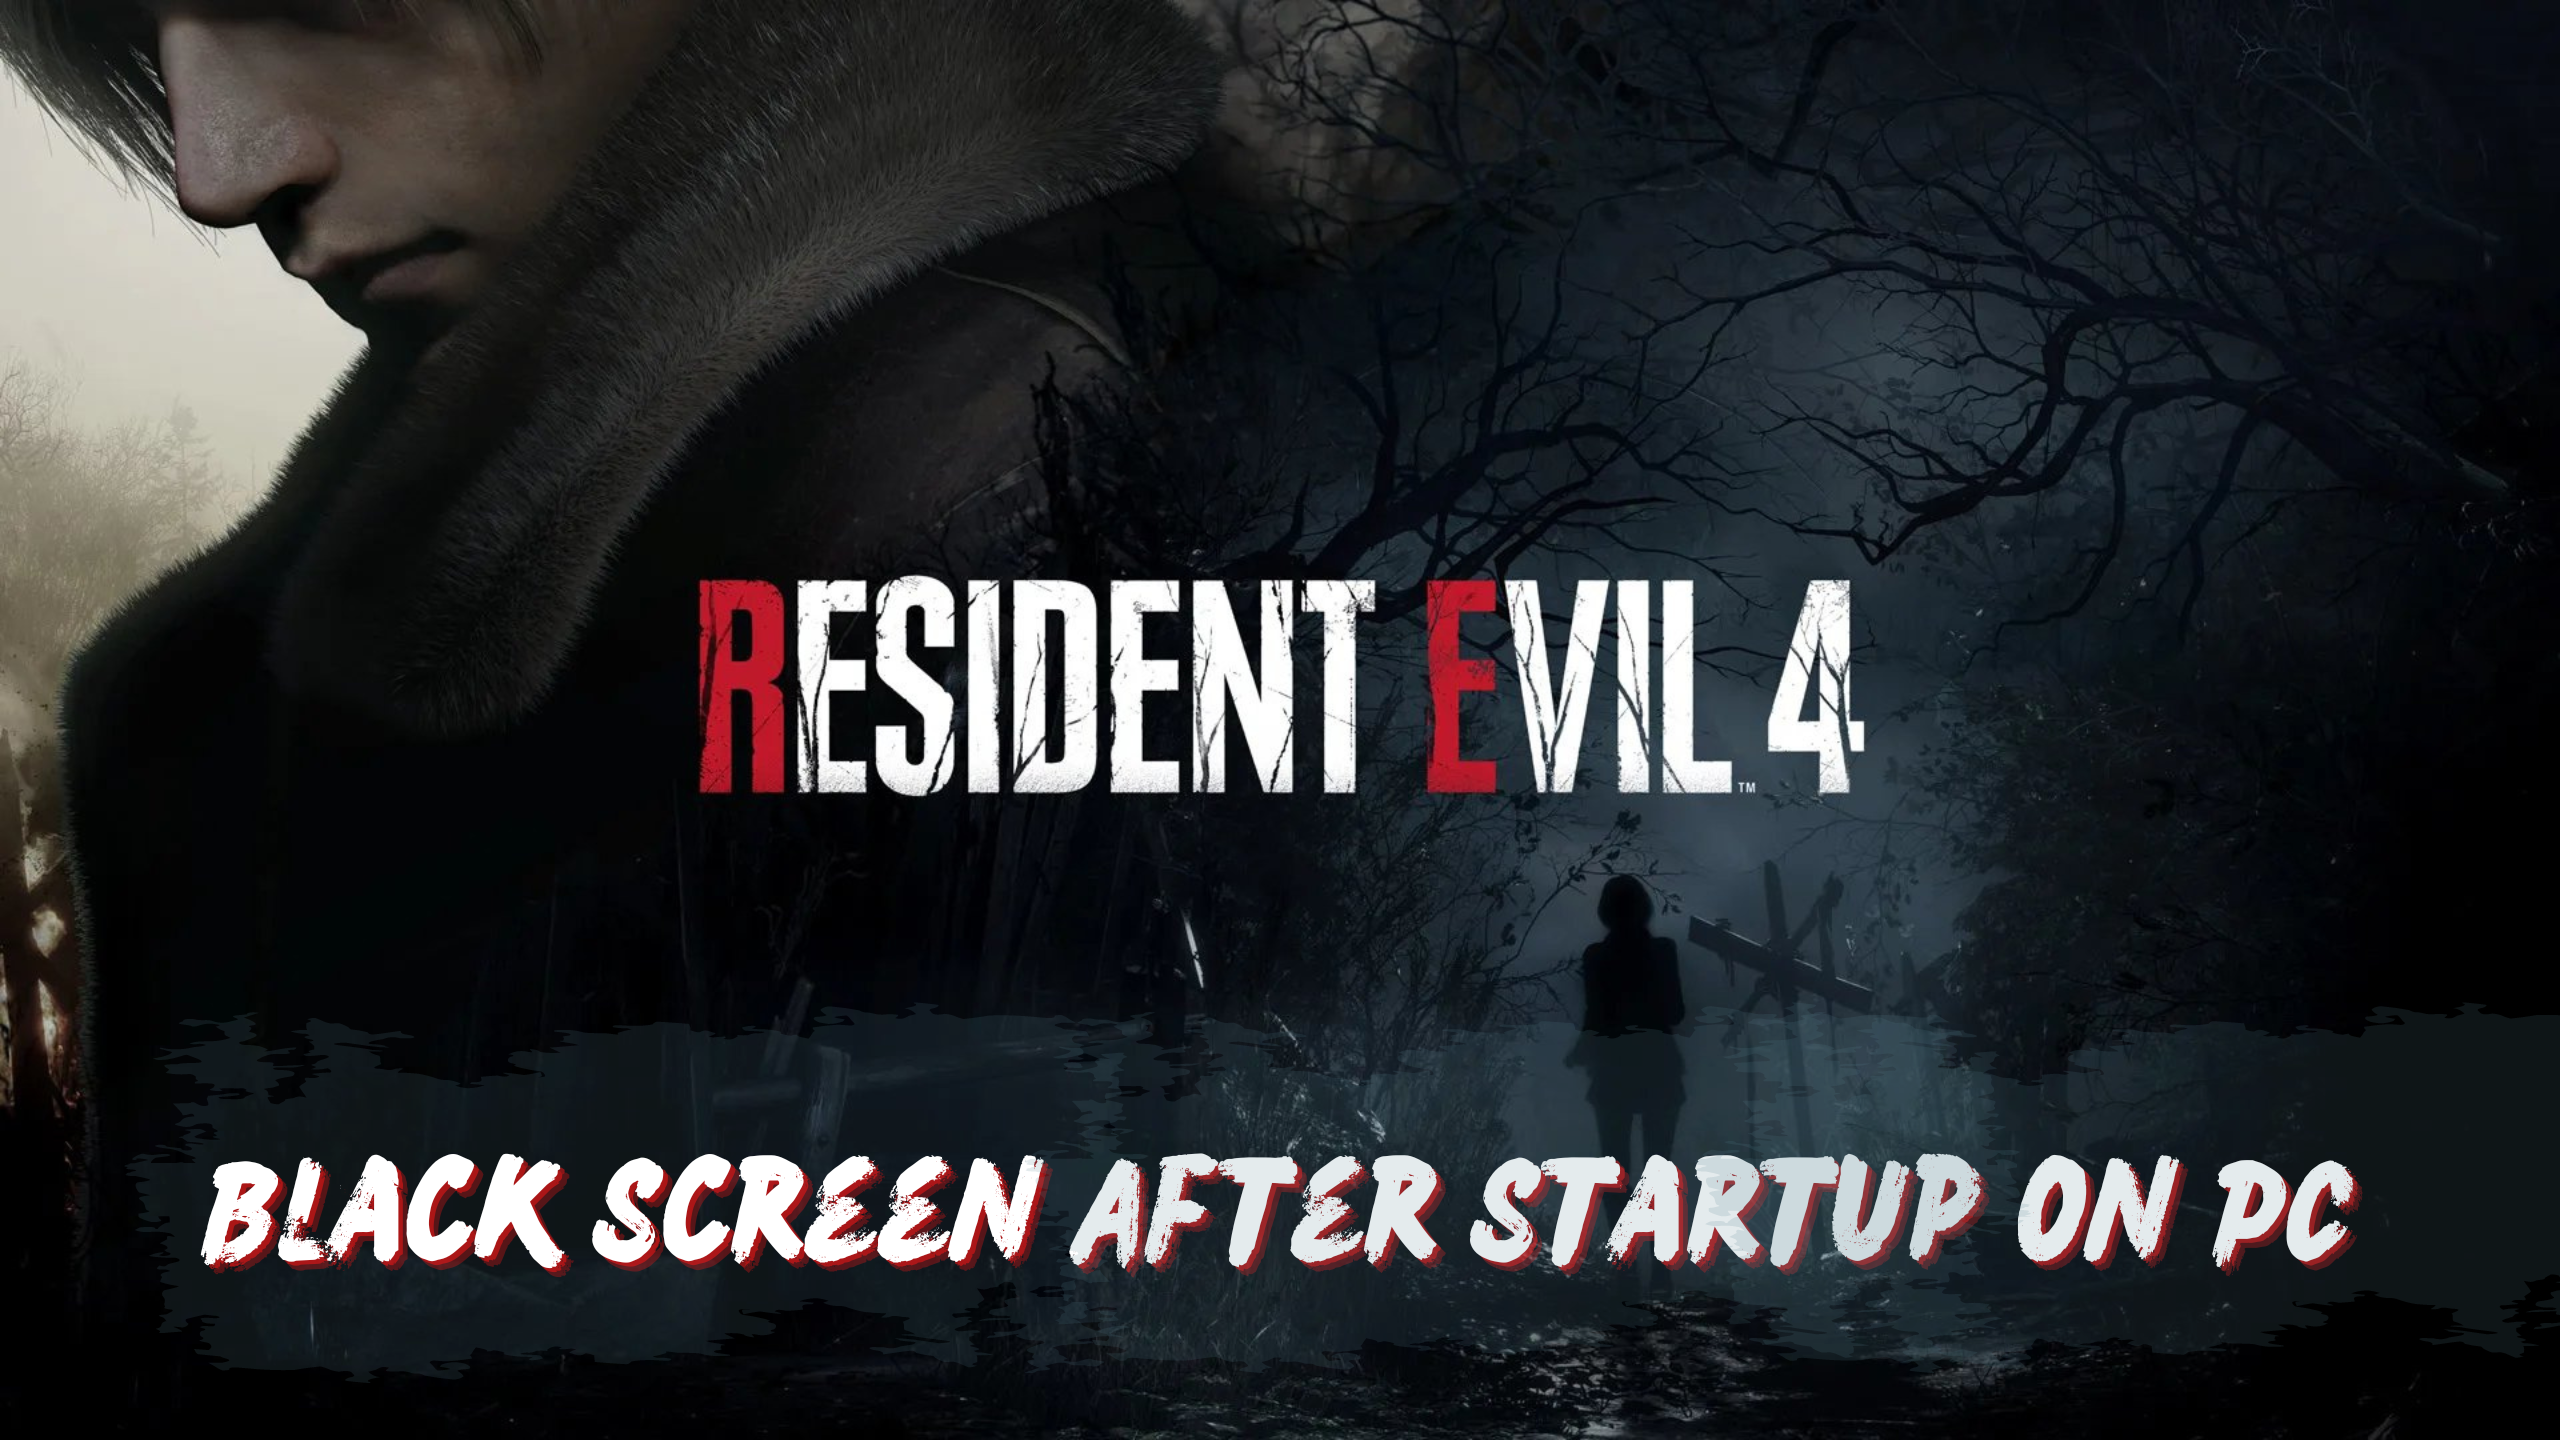 Resident Evil 4 Black Screen After Startup on PC